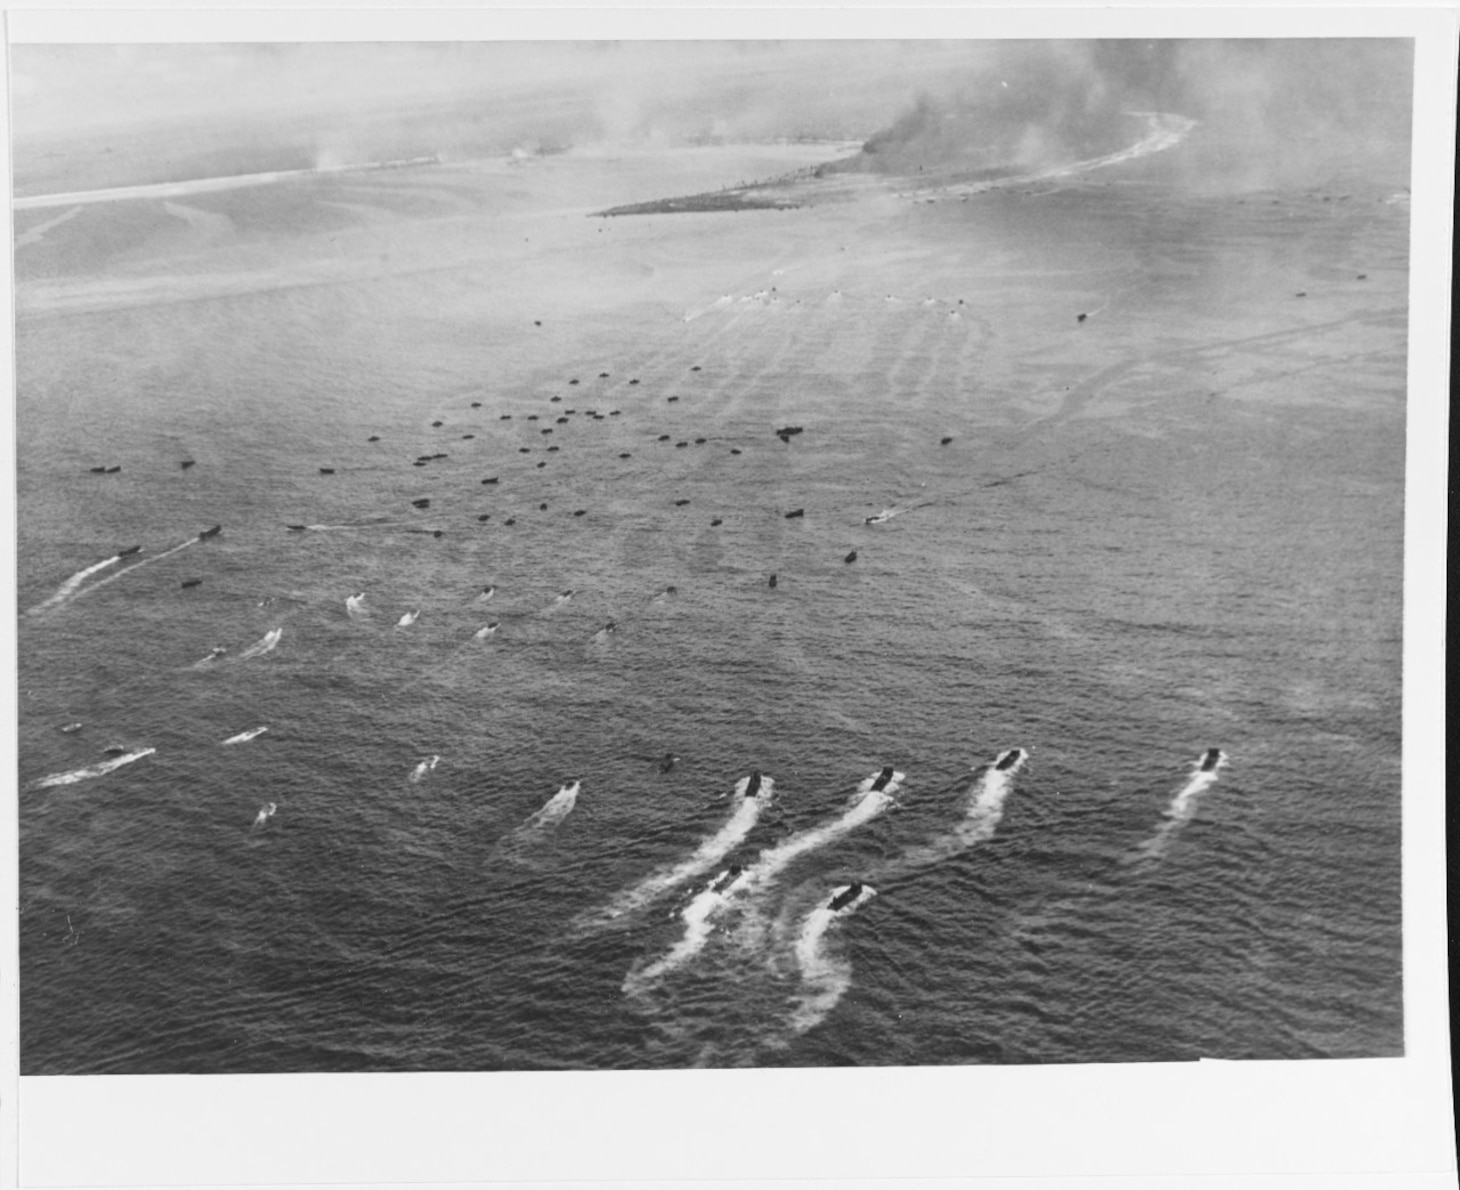 Landing craft move toward Kwajalein Island's western end, during resupply operations on "D+2" day, 3 February 1944. Boats in foreground are LCMS. Most others are LVT amphibious tractors. Photographed from a USS CORAL SEA (CVE-57) plane. Naval History and Heritage Command Photo.